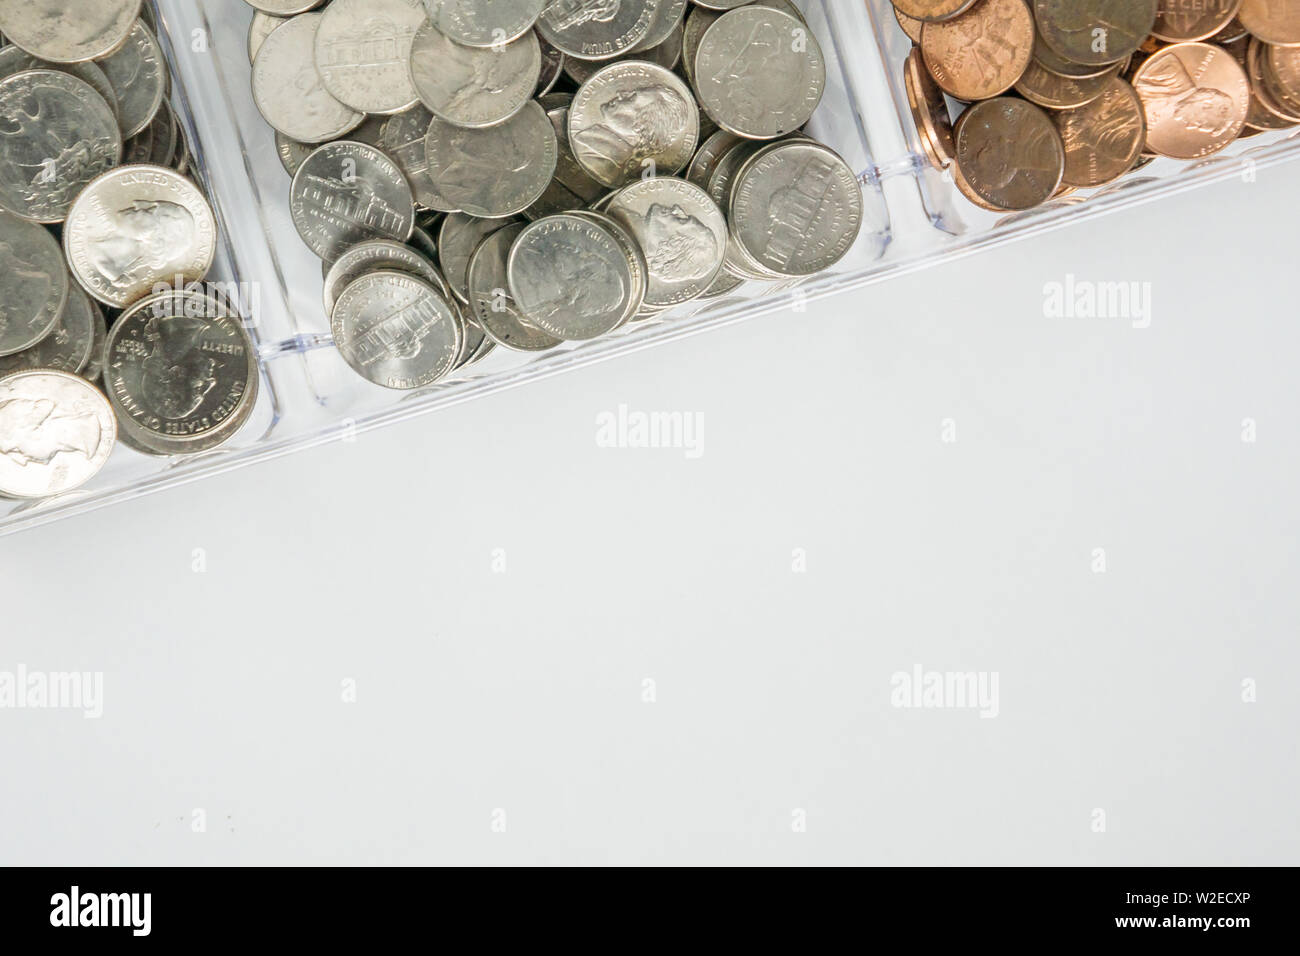 Isolated organized loose coin change on top side, white background, blank empty room space for copy or text on bottom. Financial organization money co Stock Photo